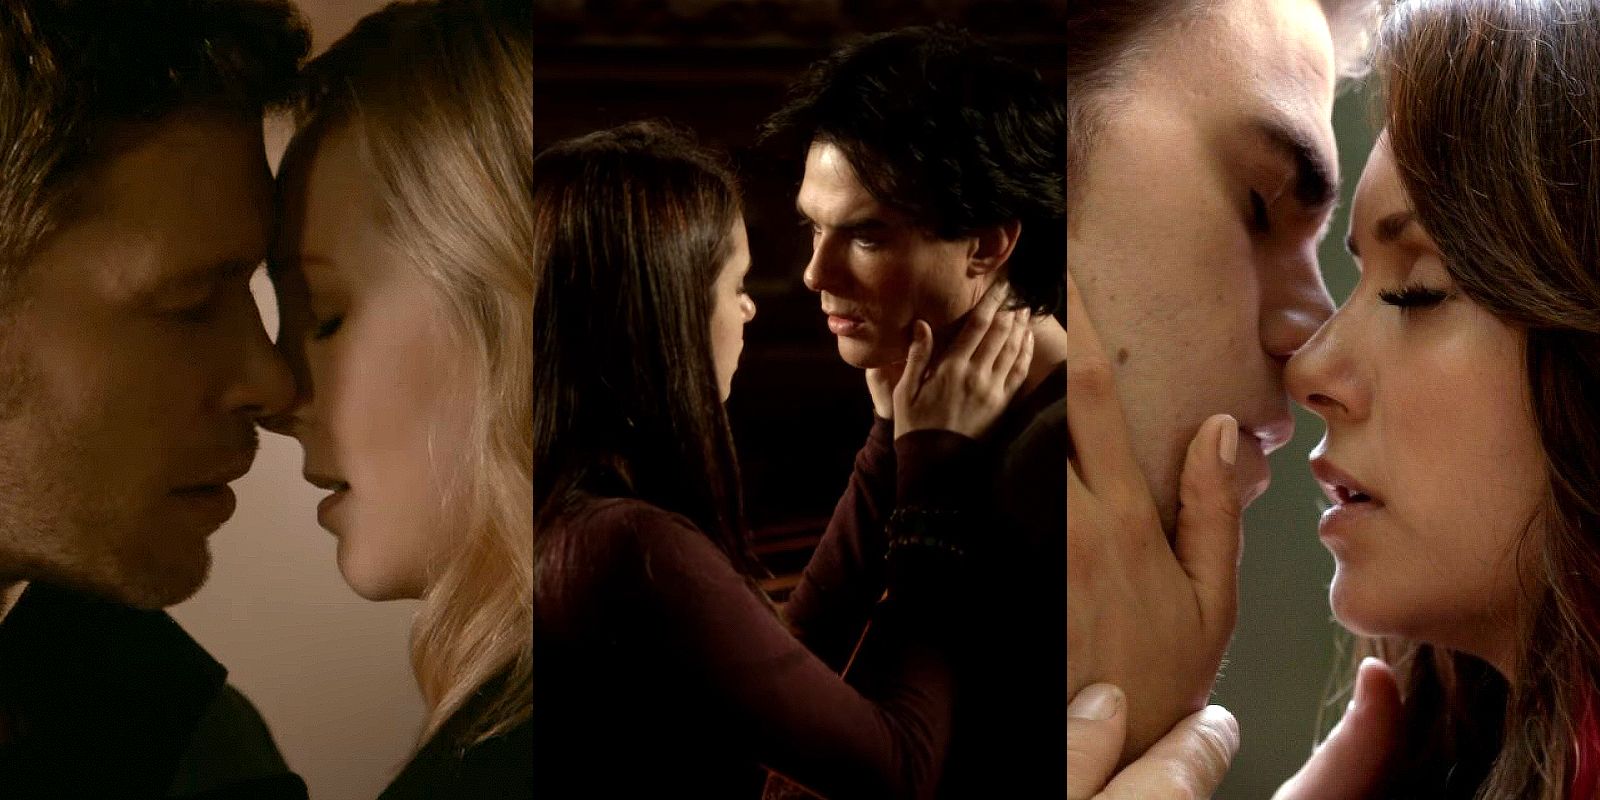 Collage of near-kisses in the Vampire Diaries drama series.